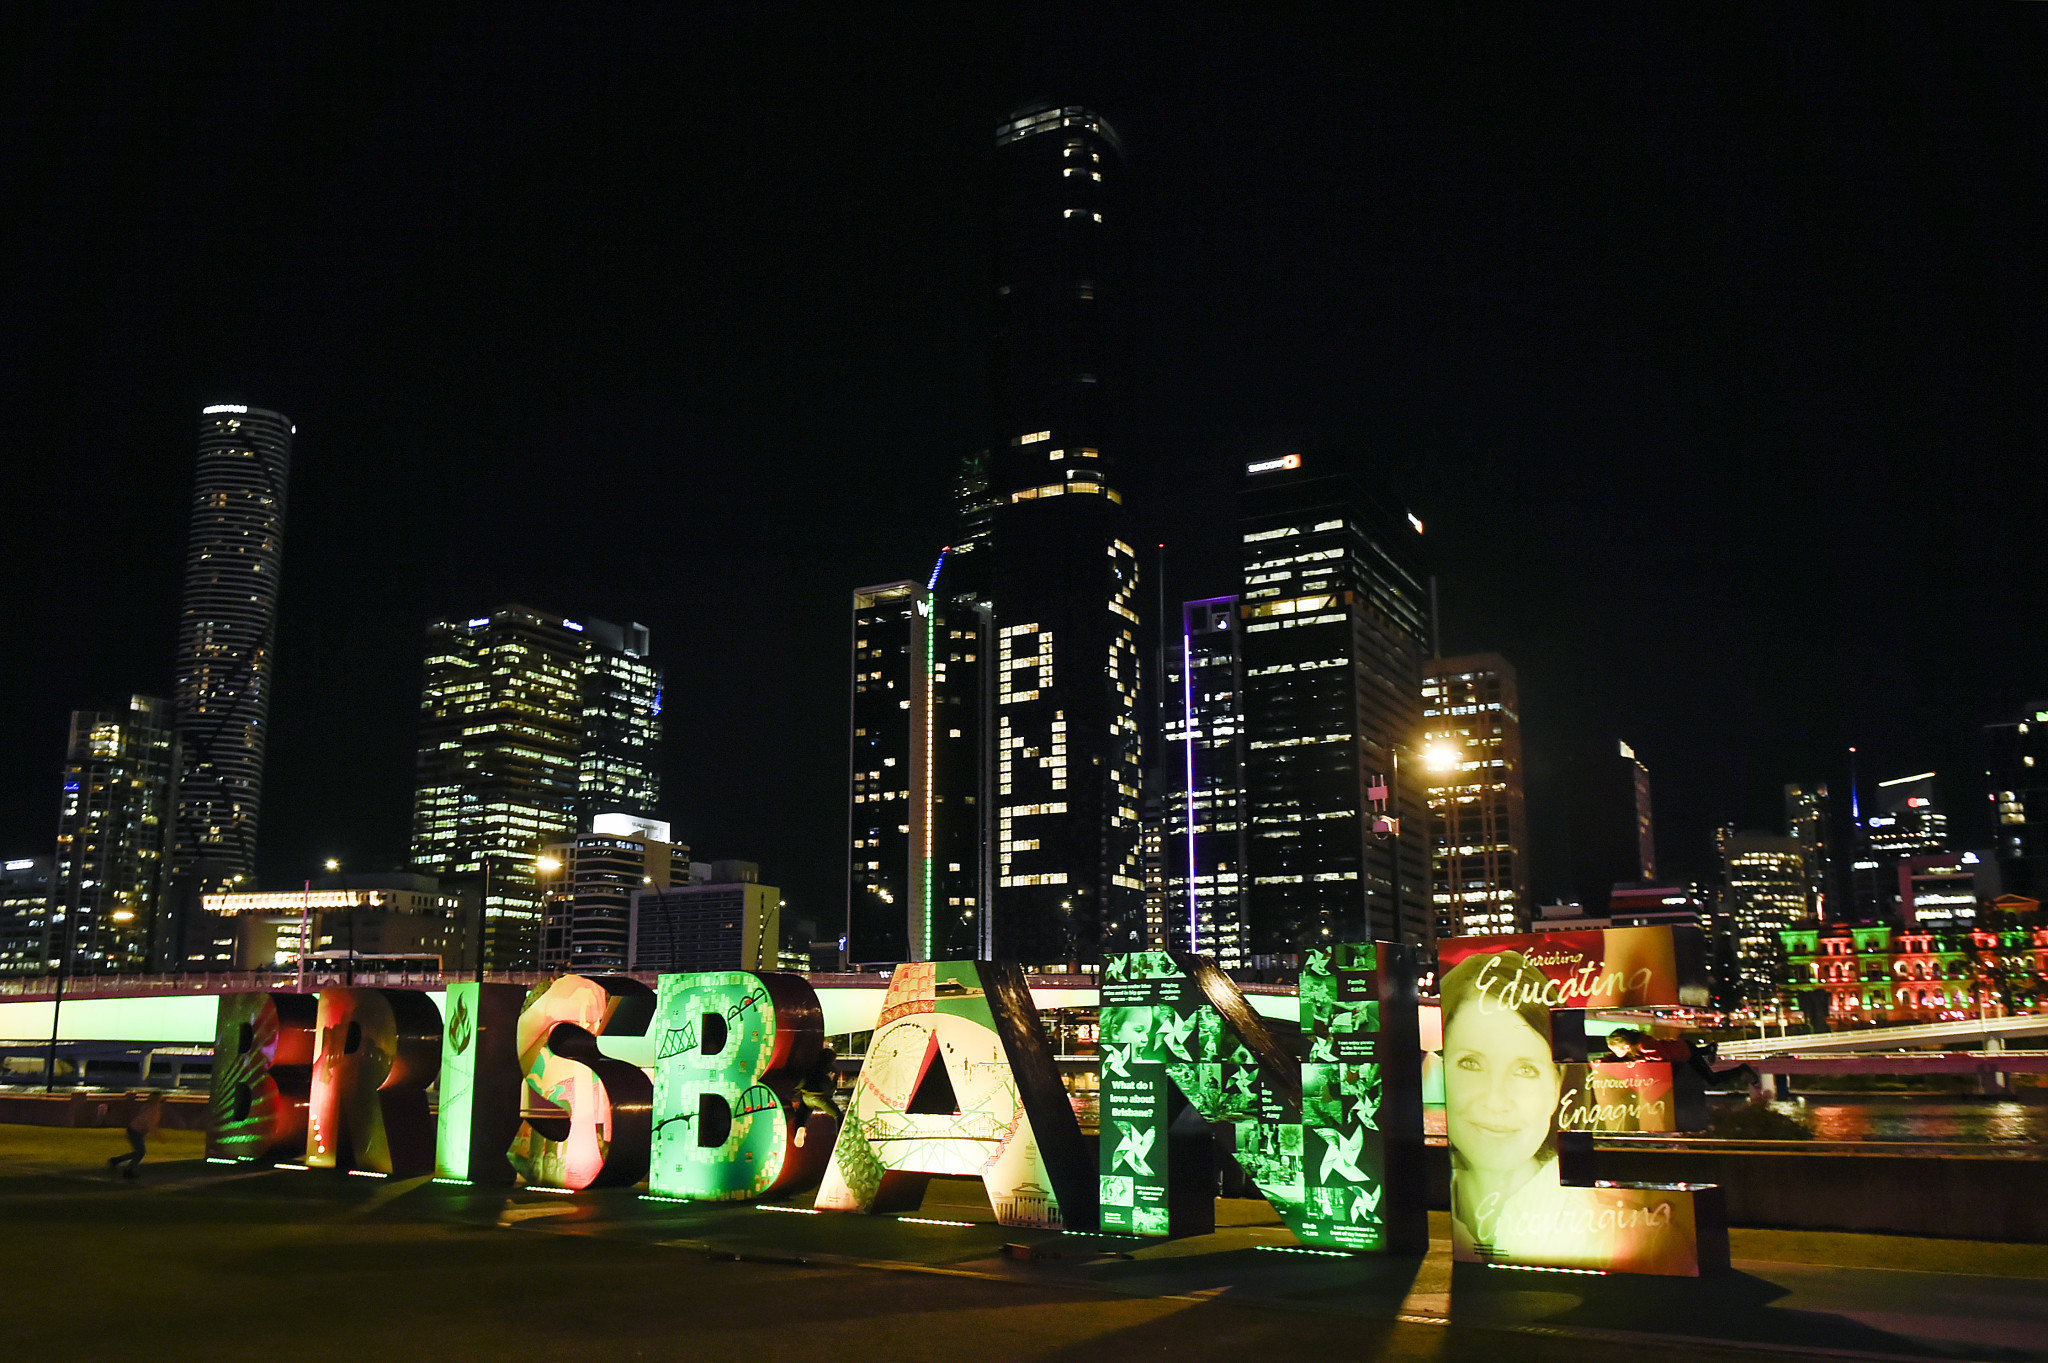 Brisbane 2032 is aiming for low emissions through technology ©Getty Images